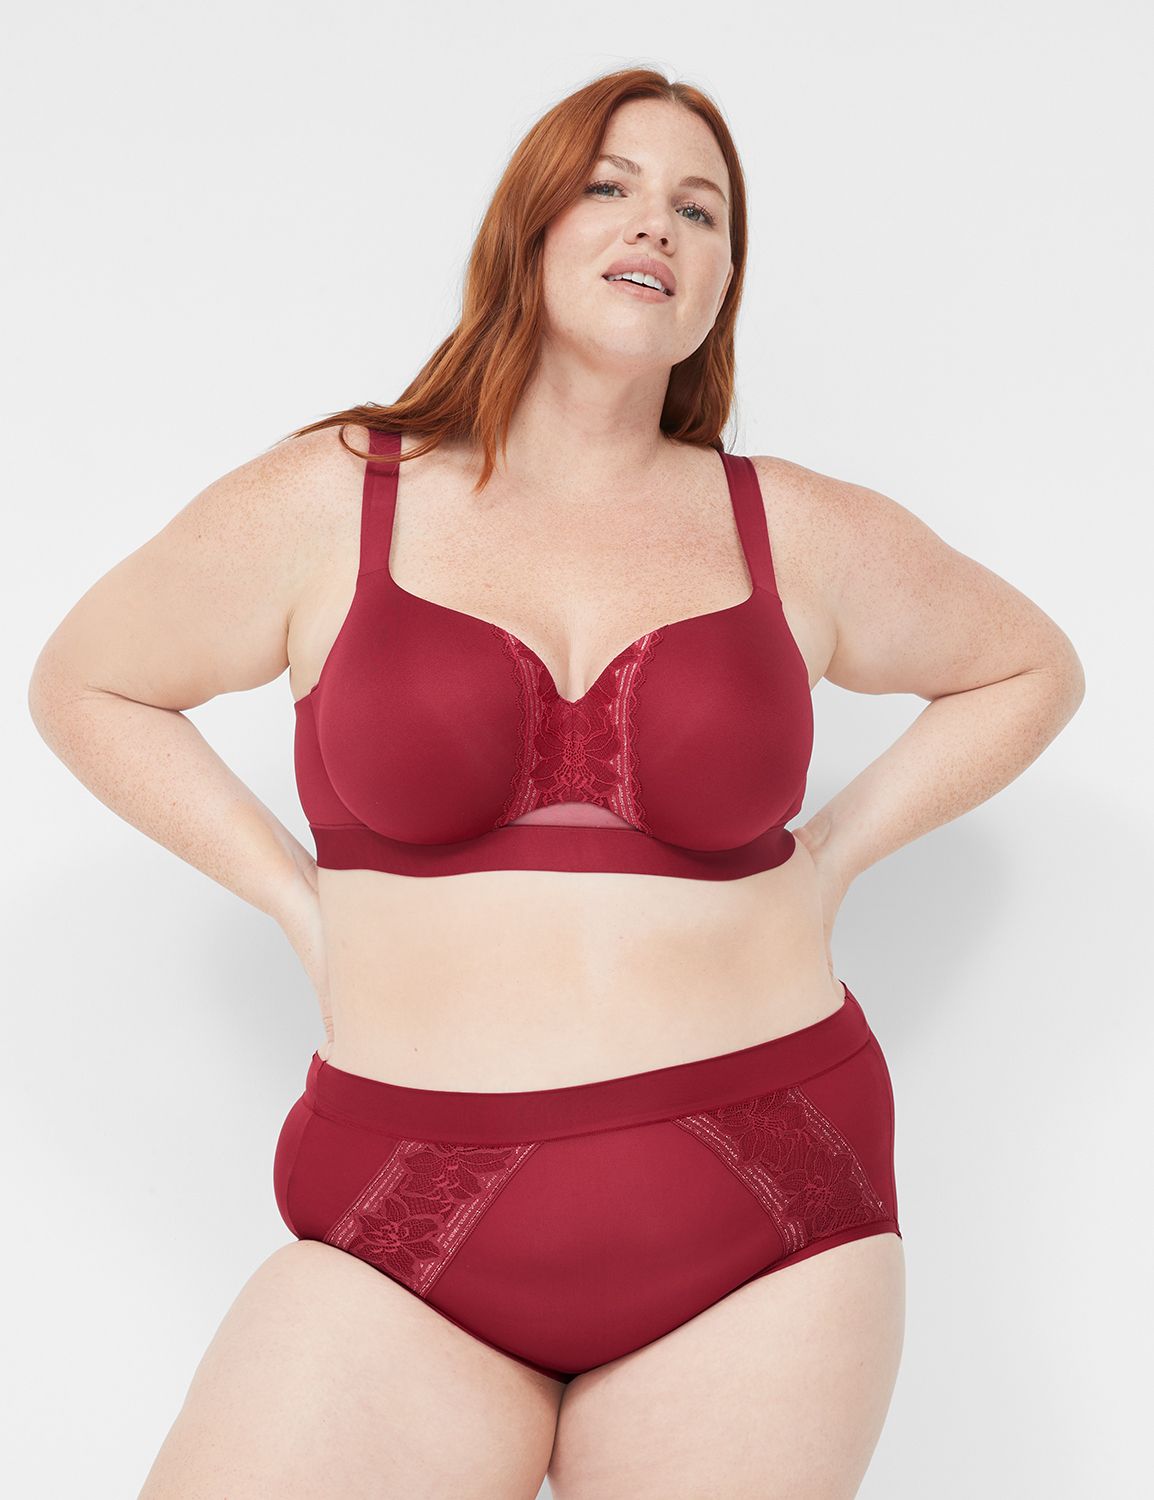 Size 48G Comfy Bra & Panty Collection - Comfort Bliss